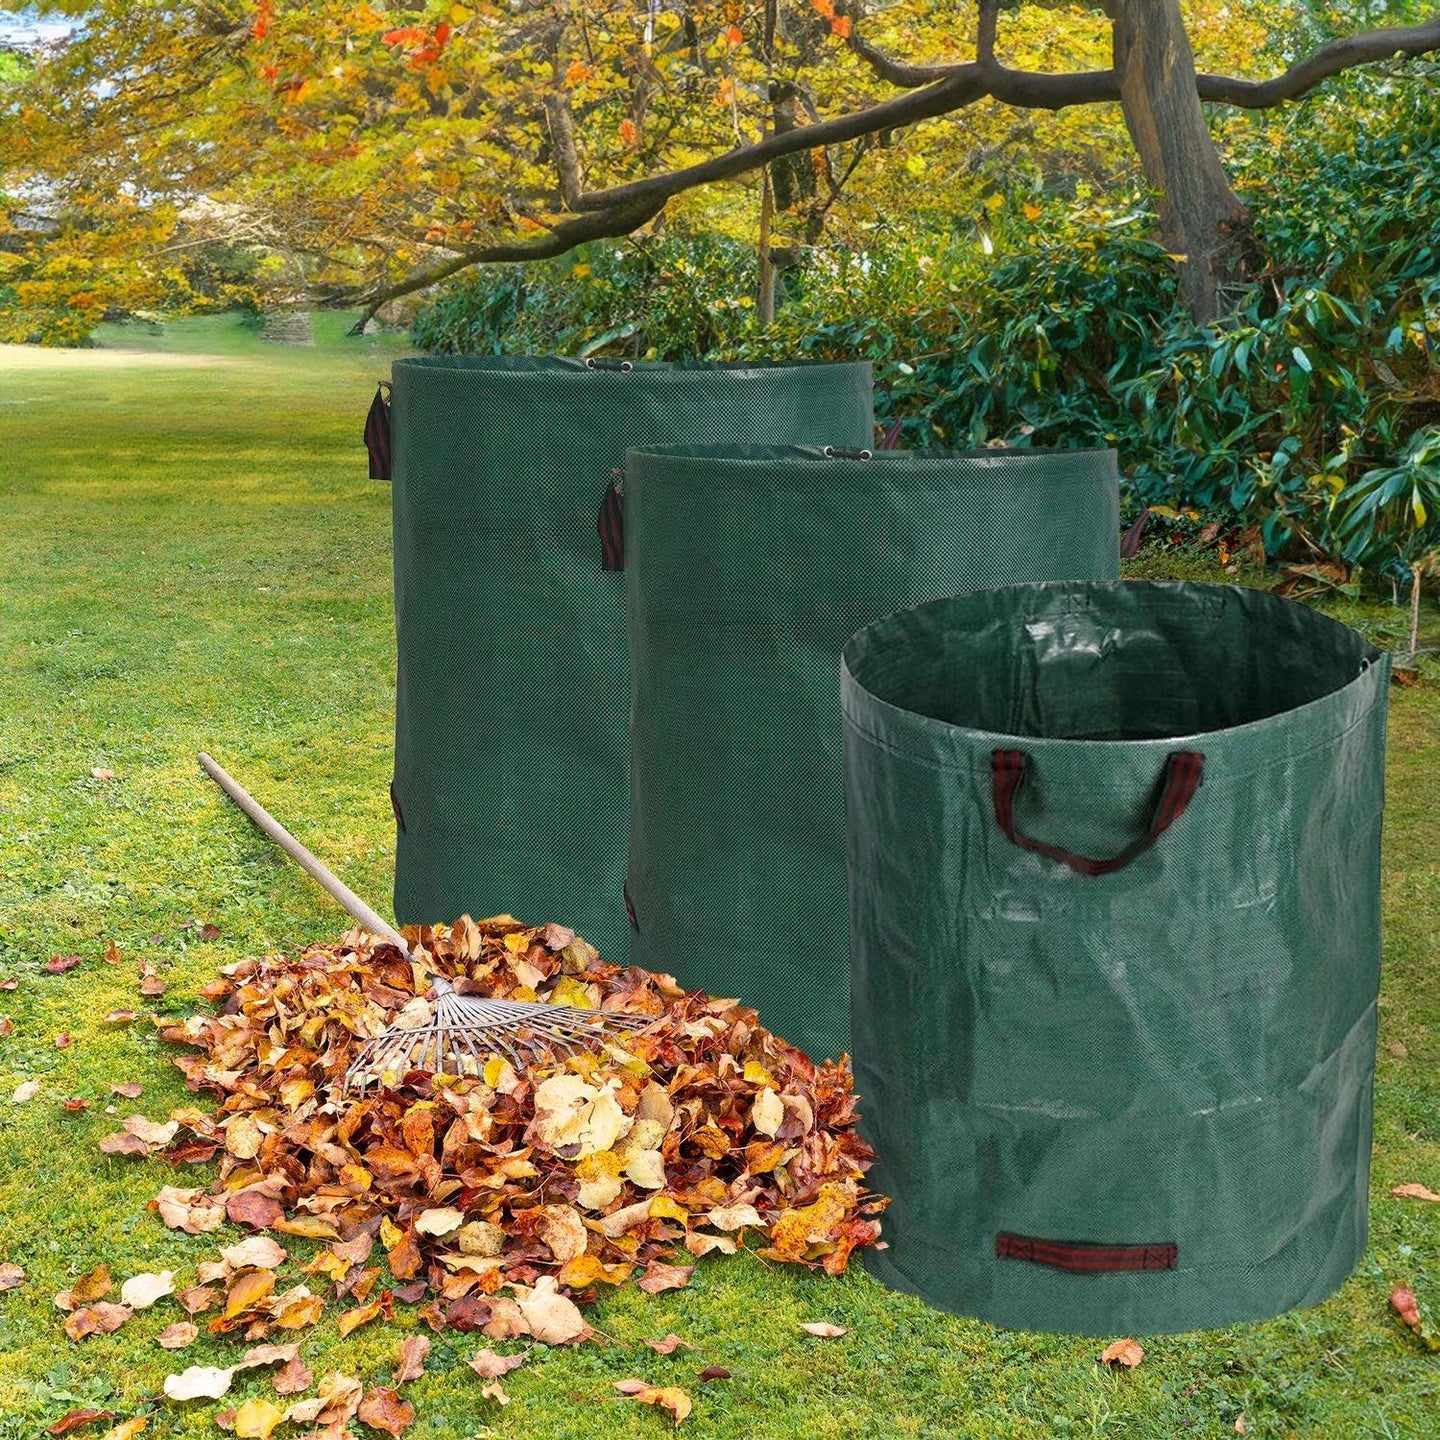 NOVEDEN 3 Packs Garden Waste Bags with 72 gallons (Green) NE-GWB-100-XS Products On Sale Australia | Home & Garden > Garden Tools Category